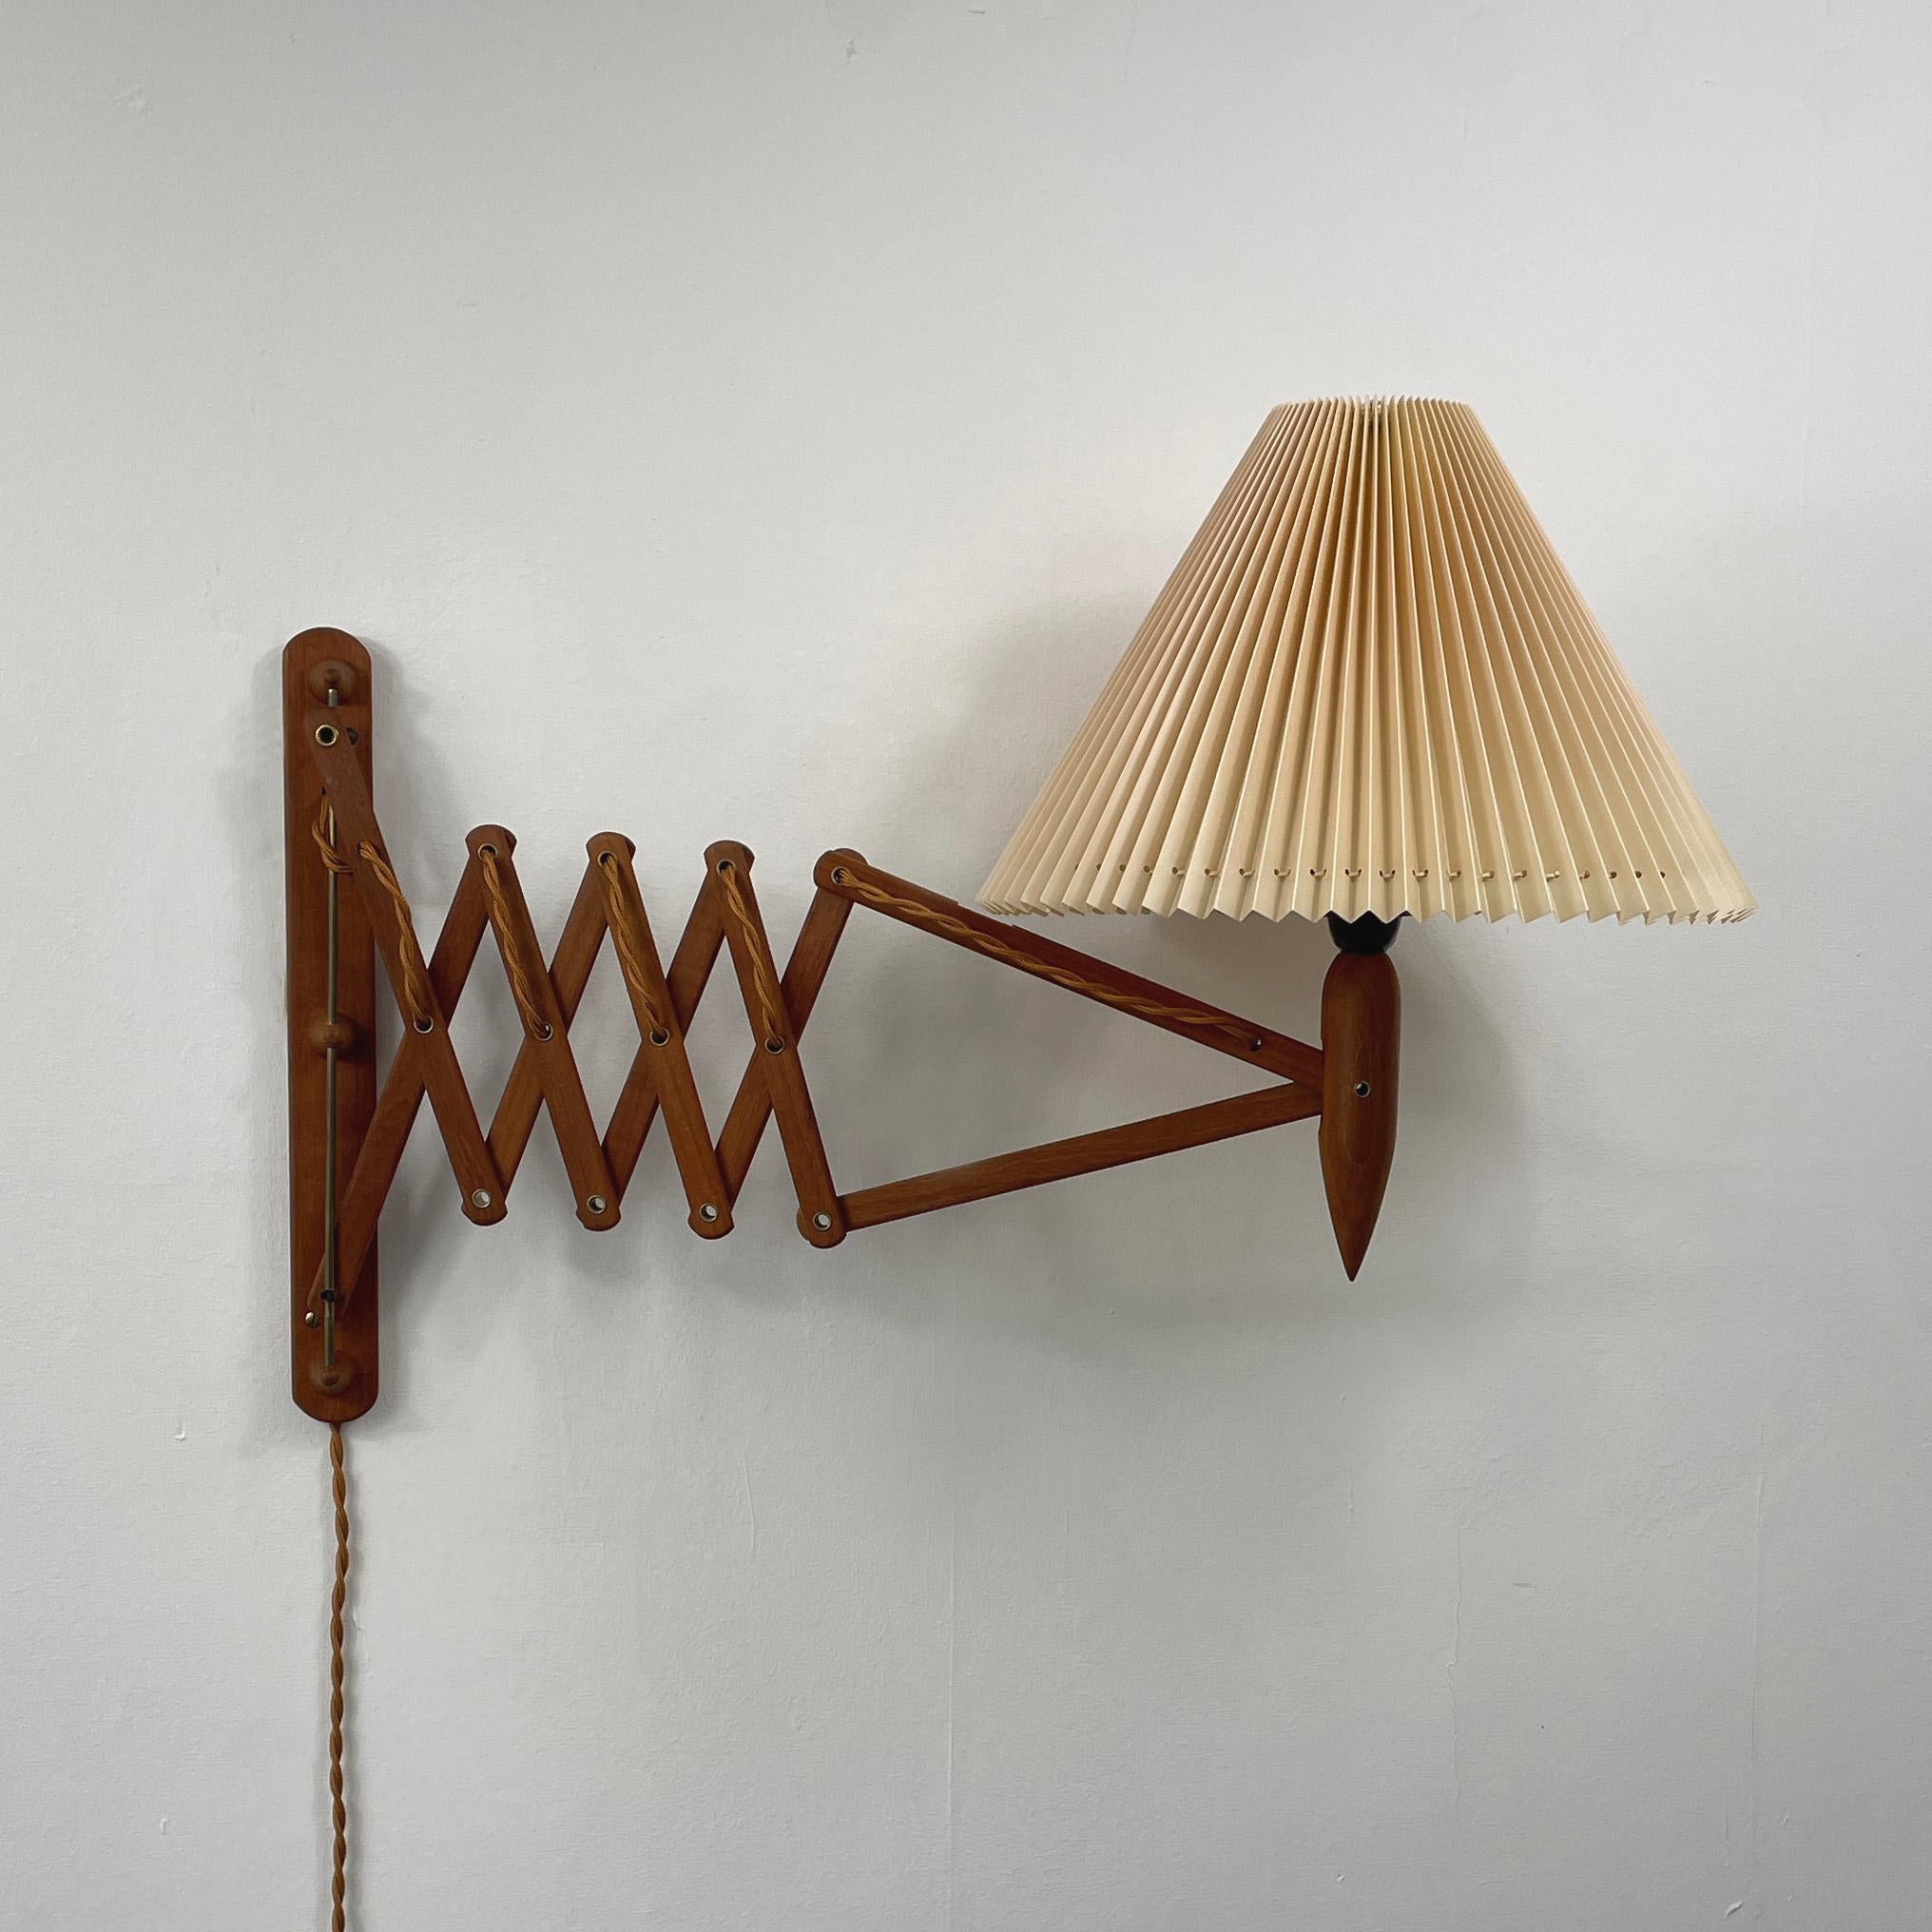 This beautiful wall light was designed by Kaare Klint and manufactured in Denmark in the 1950s. It features a teak scissor adjustable lamp arm and a pleated cream colored – also adjustable – plastic lampshade. The lampshade is original. 

The light